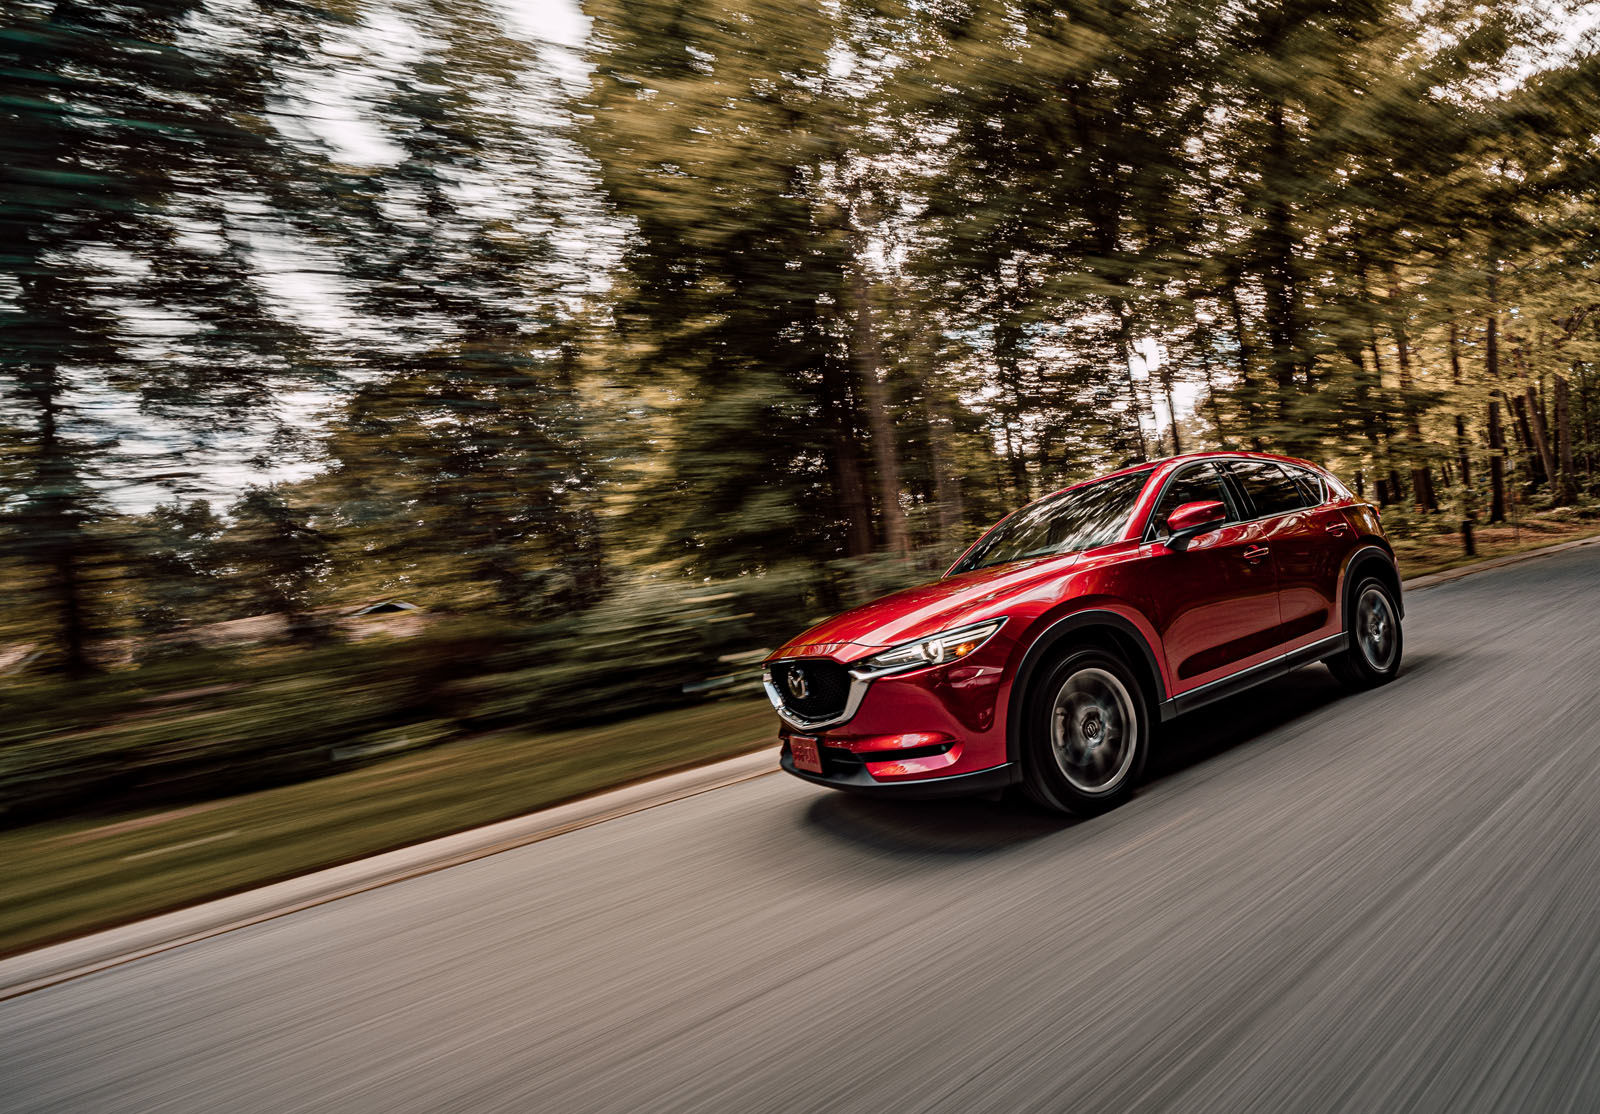 Three ways the 2019 Mazda CX-5 stands out from the Kia Sportage